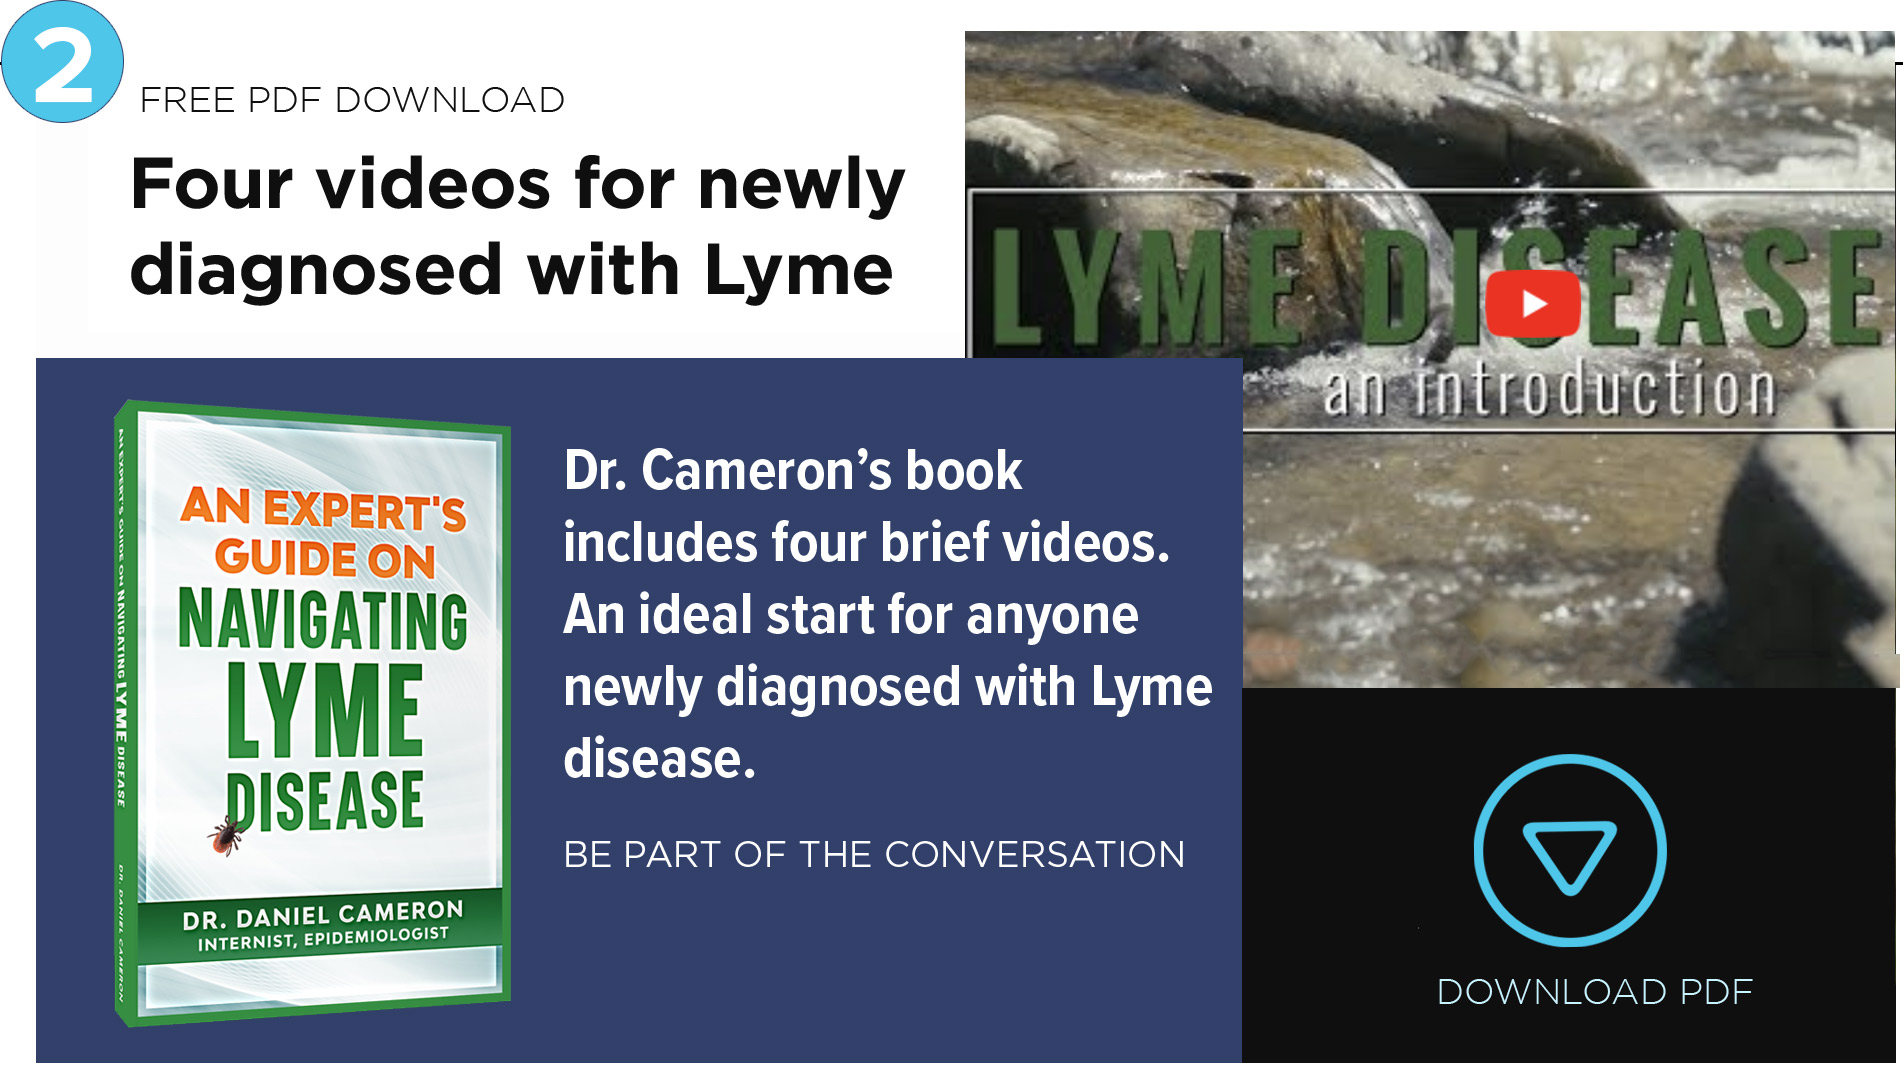 Introduction to Lyme Disease videos